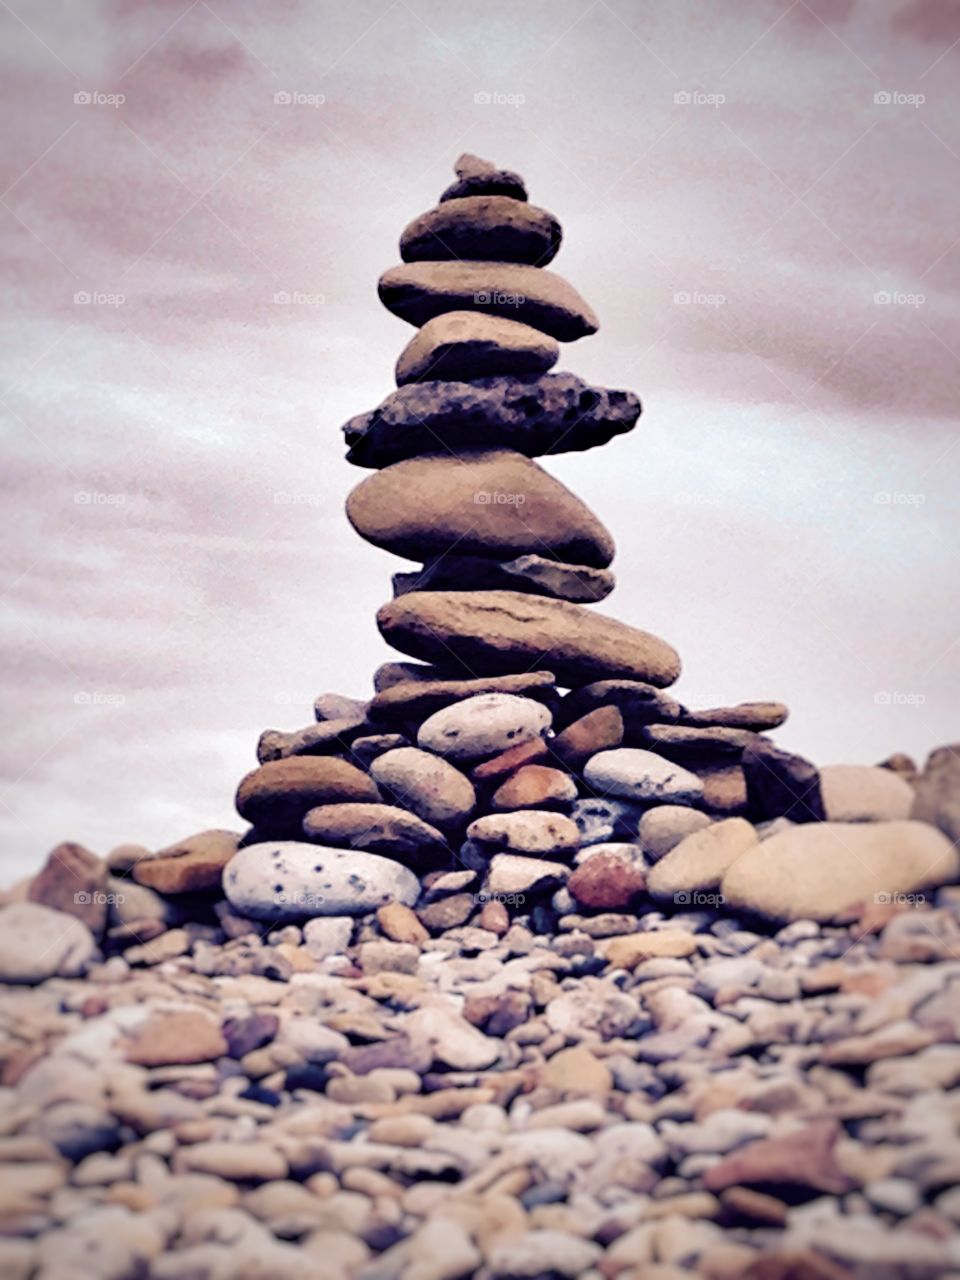 Stacked stones. Beach stones piled high
